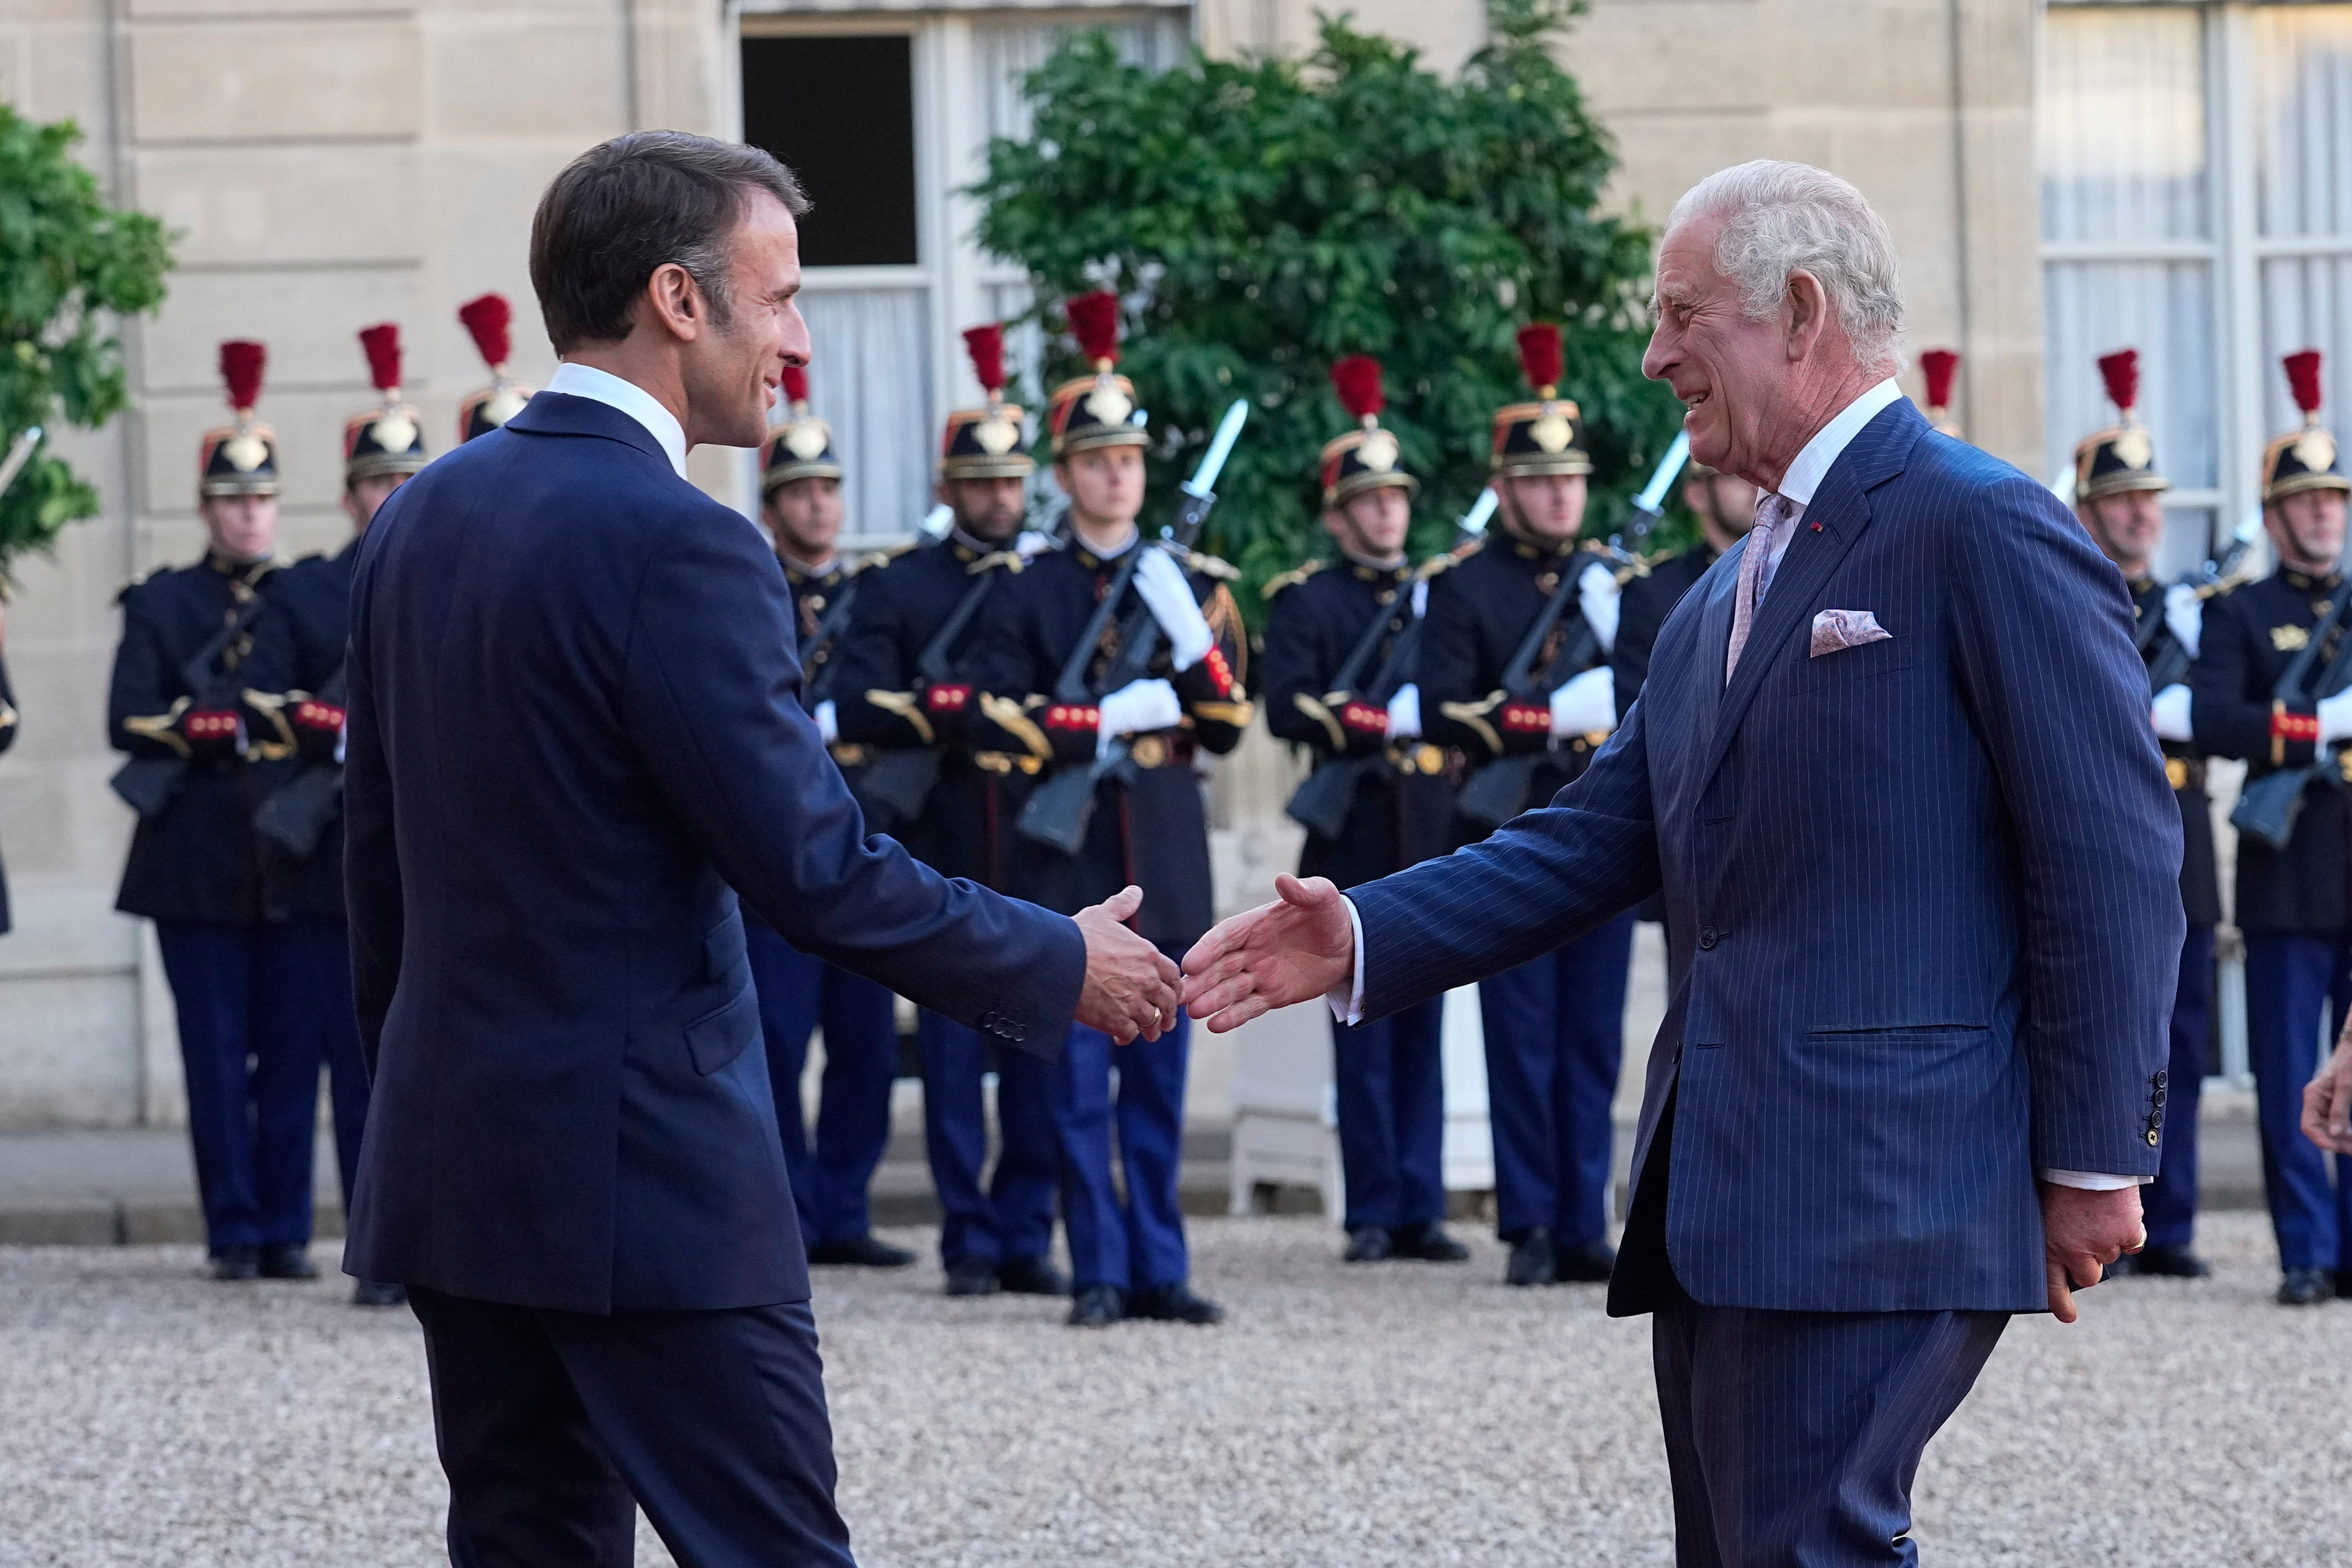 Charles and Macron bid farewell to each other